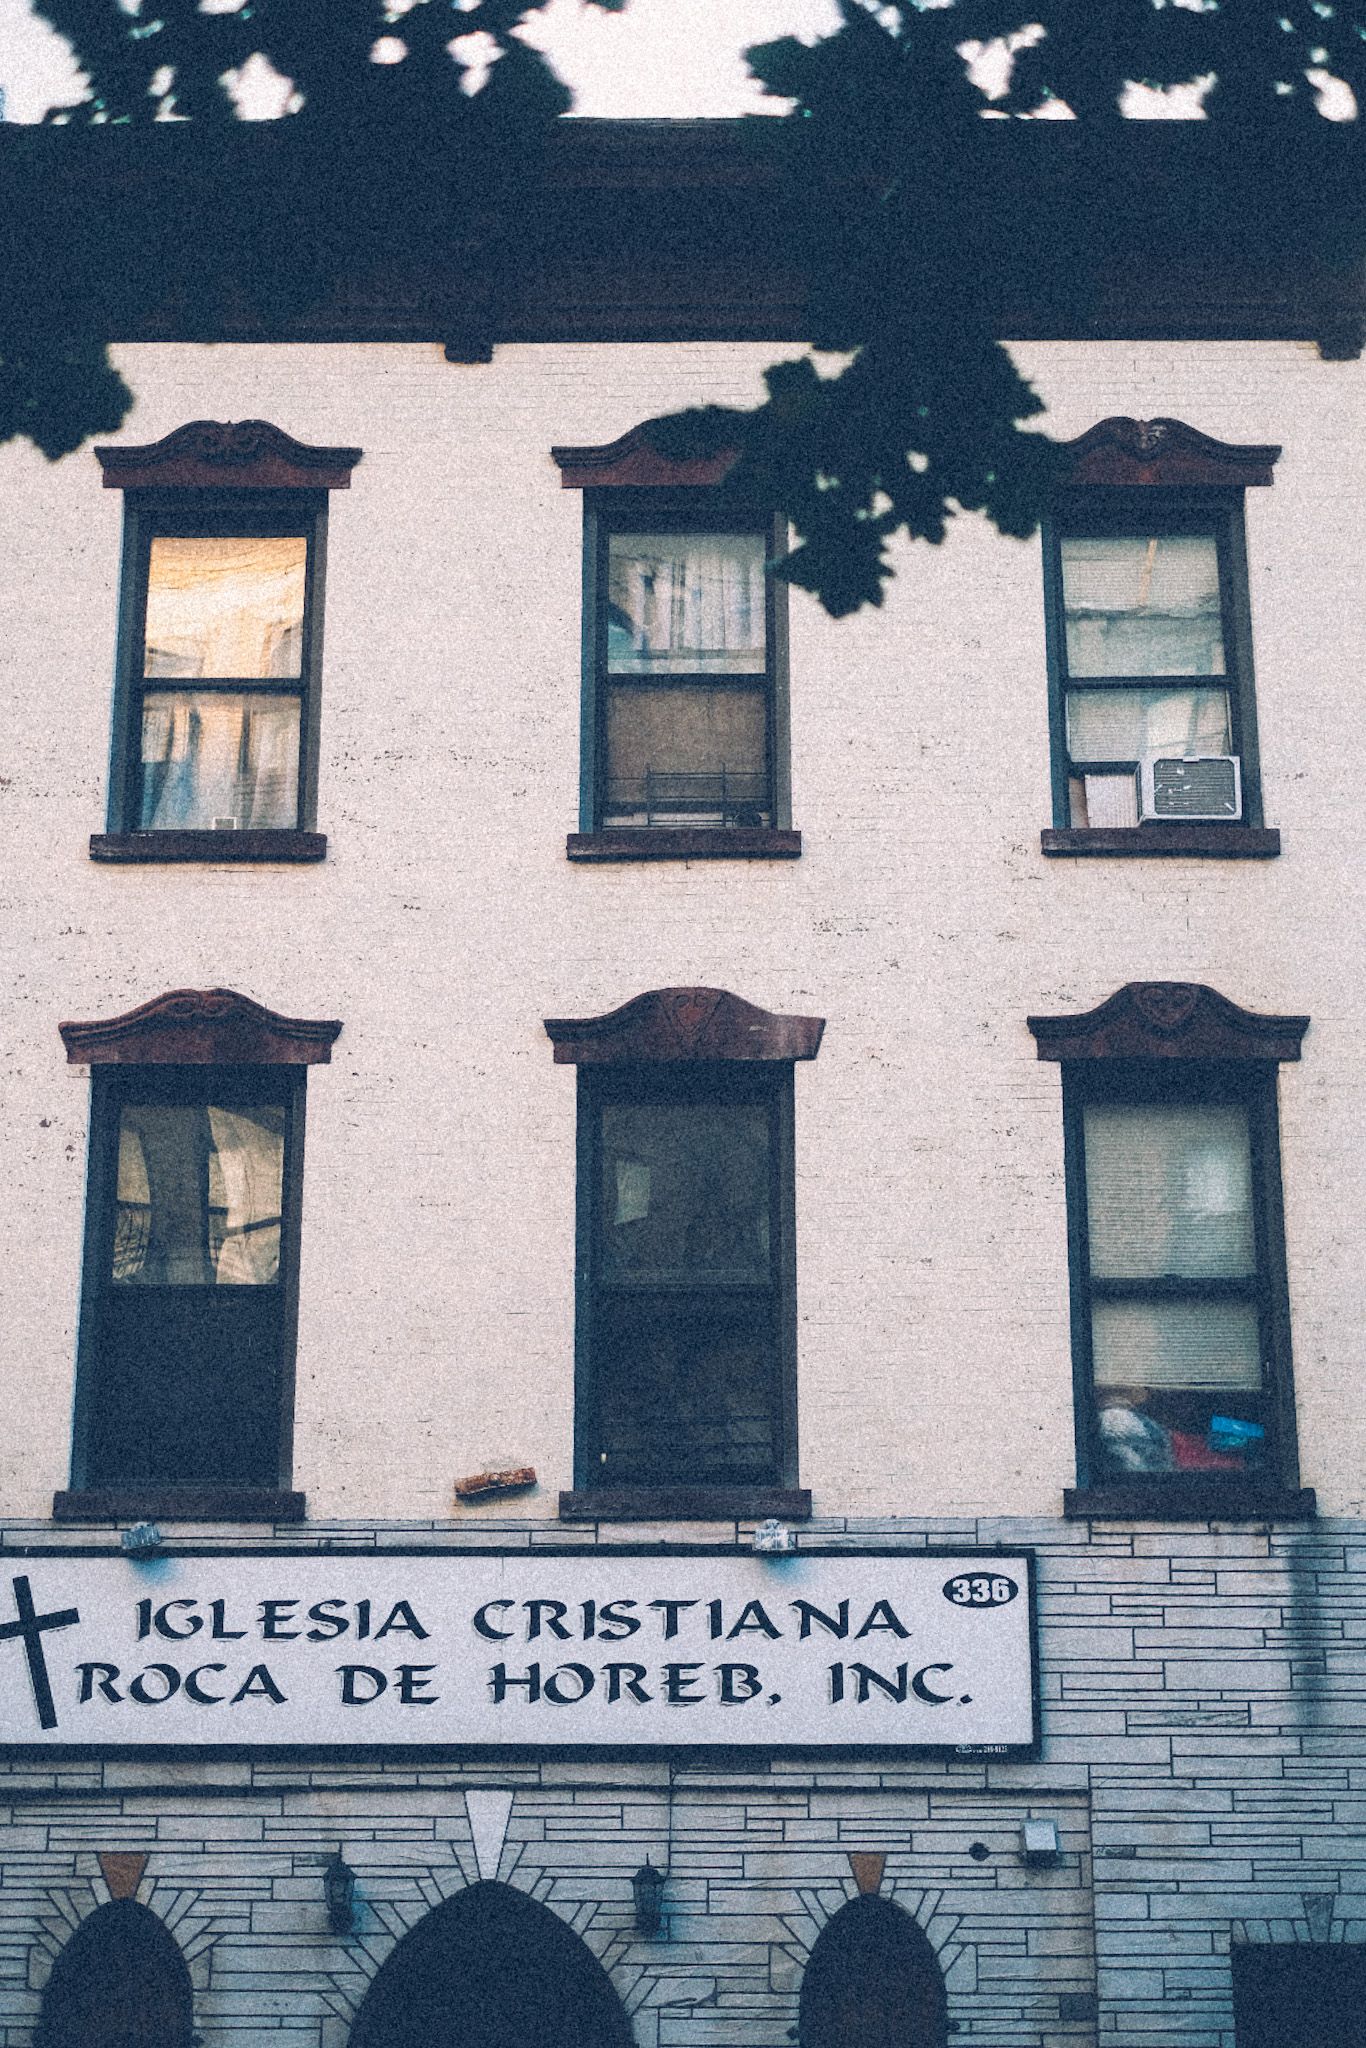 A white three-story building with dark brown trim roses up from the bottom of the photo, with a hand-painted sign saying “Iglesia Cristiana”.